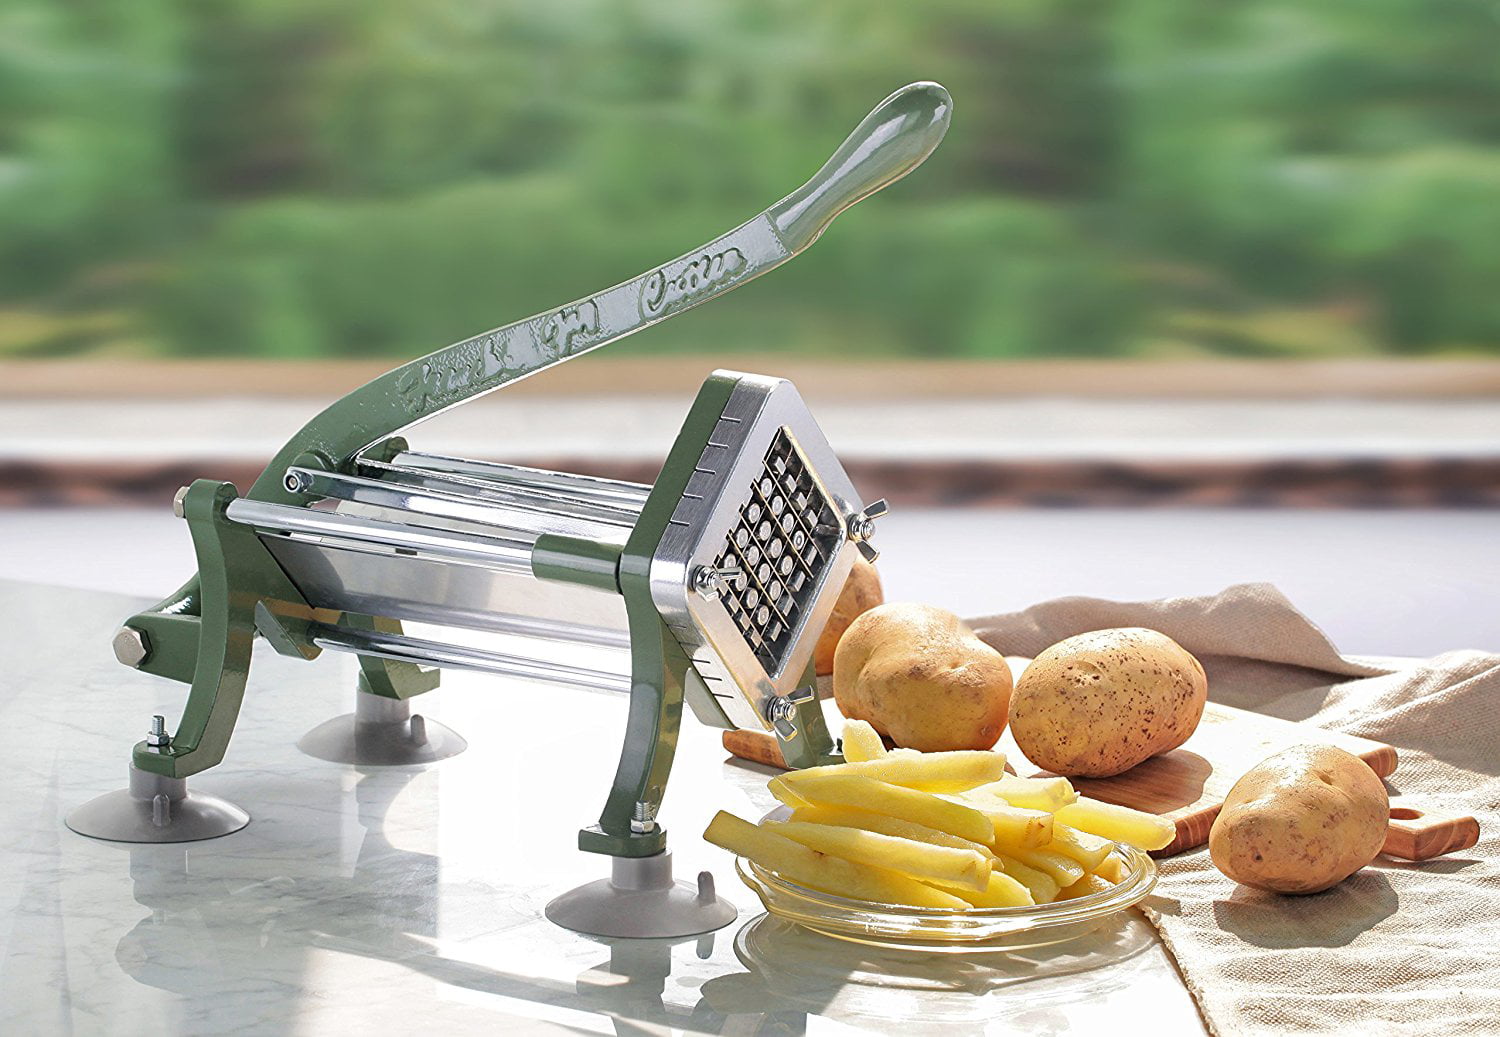 French Fry Cutter & Potato Dicer – Ivation Products